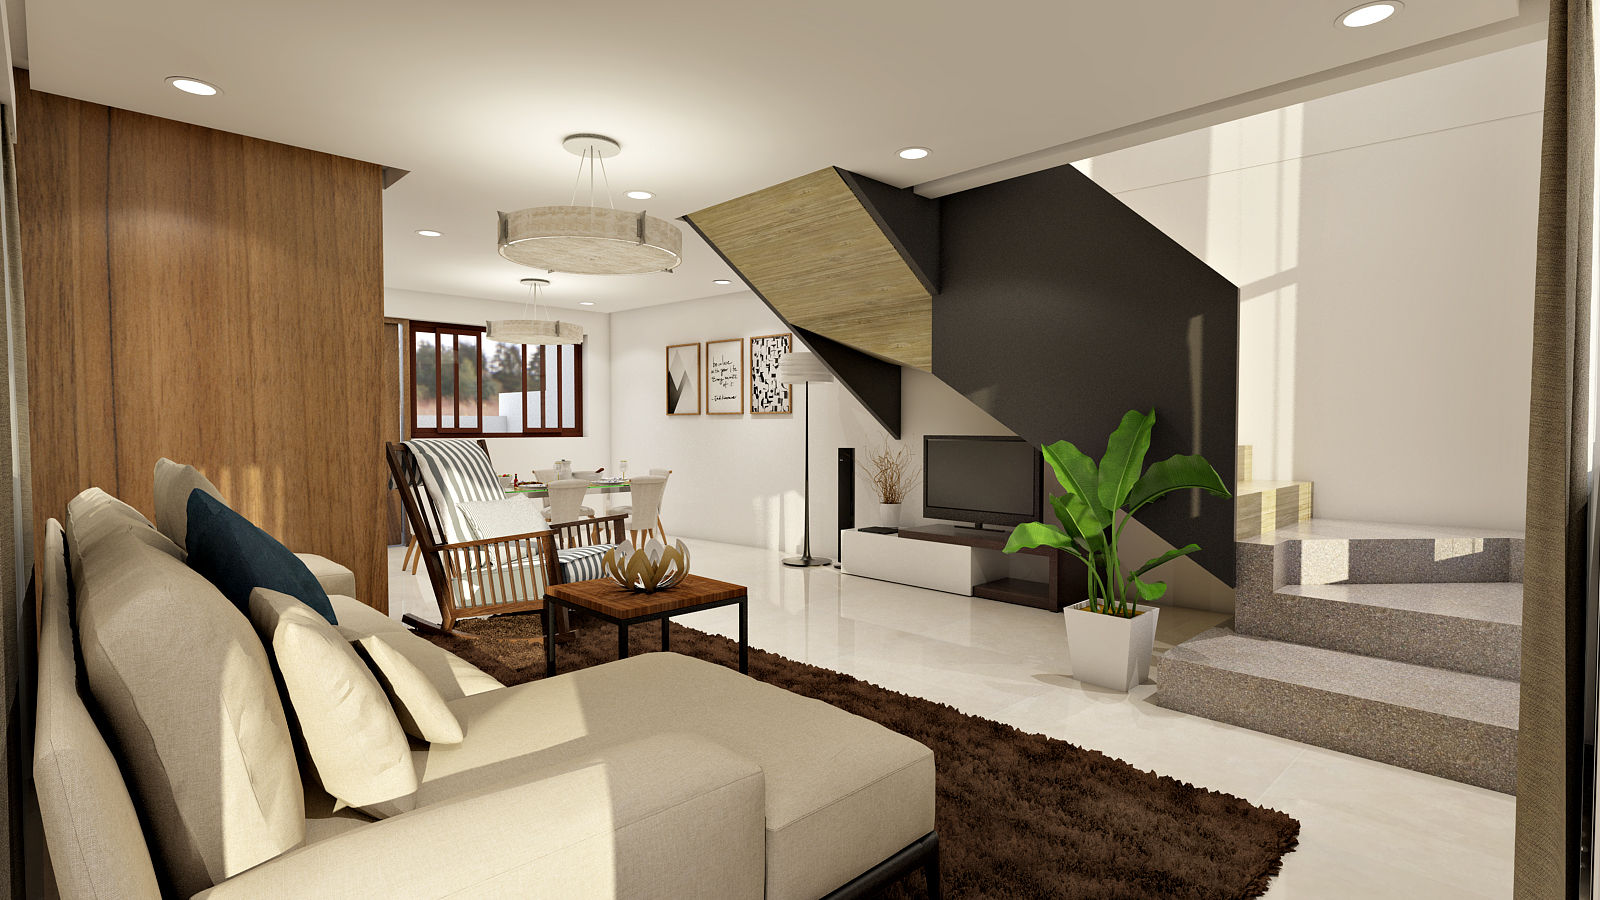 Brand new 2 storey house - Living room and stairs to upper floor homify Living room